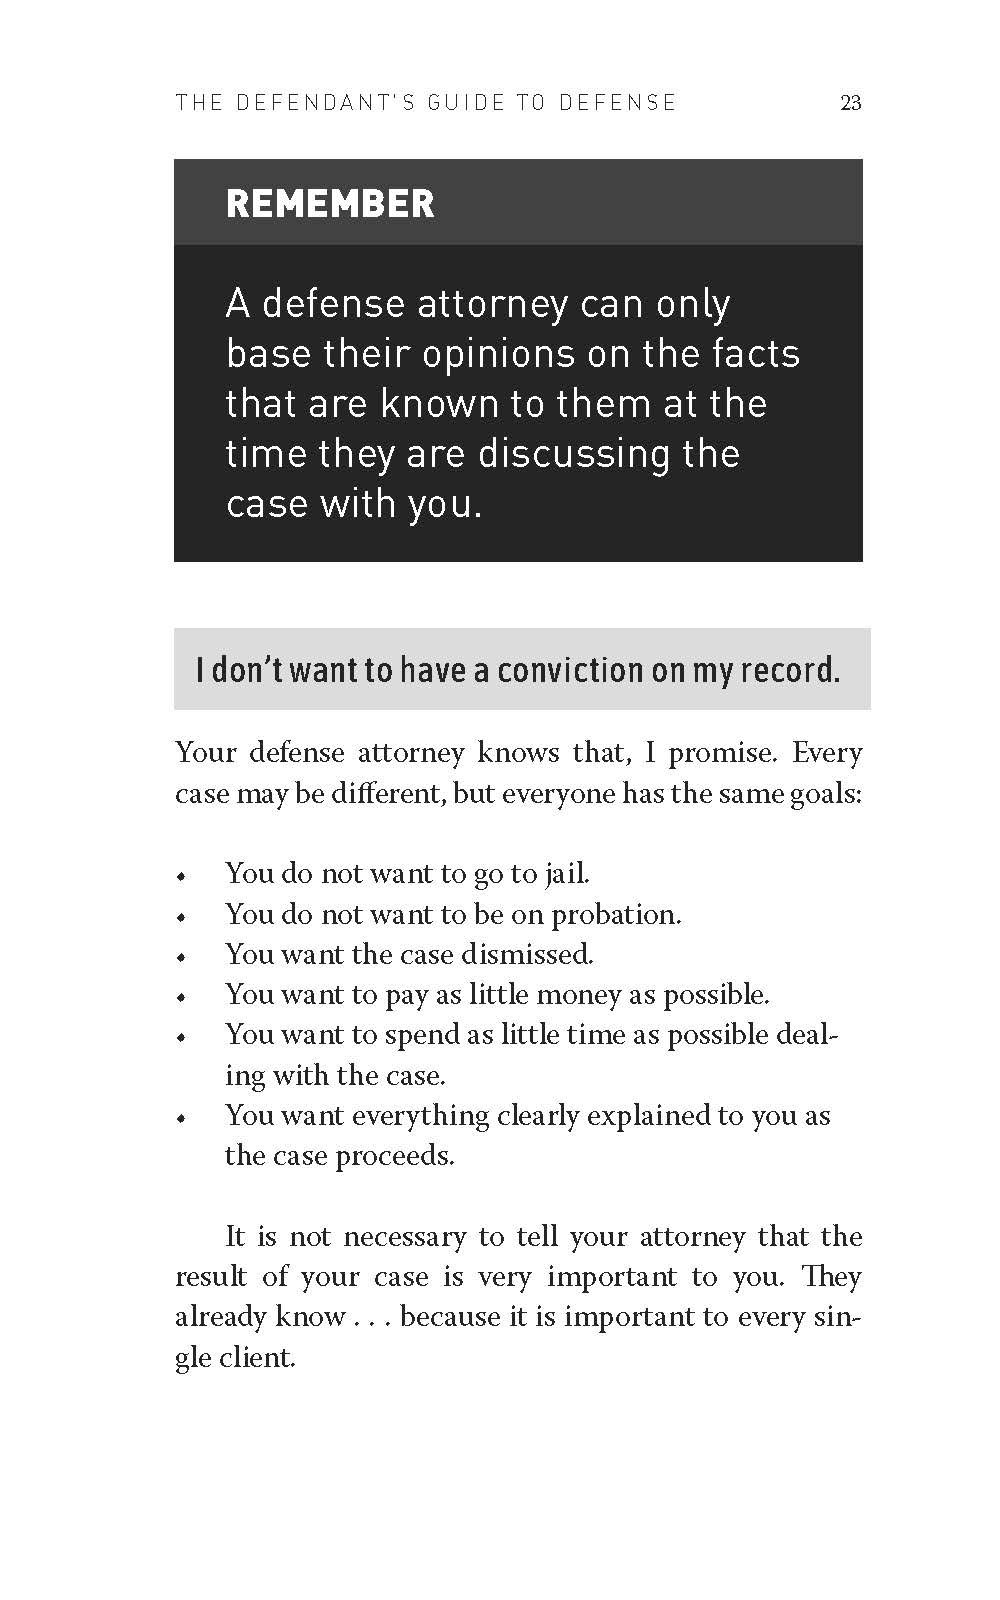 Sample_of_Defendant_s_Guide_to_Defense_Page_25.jpg